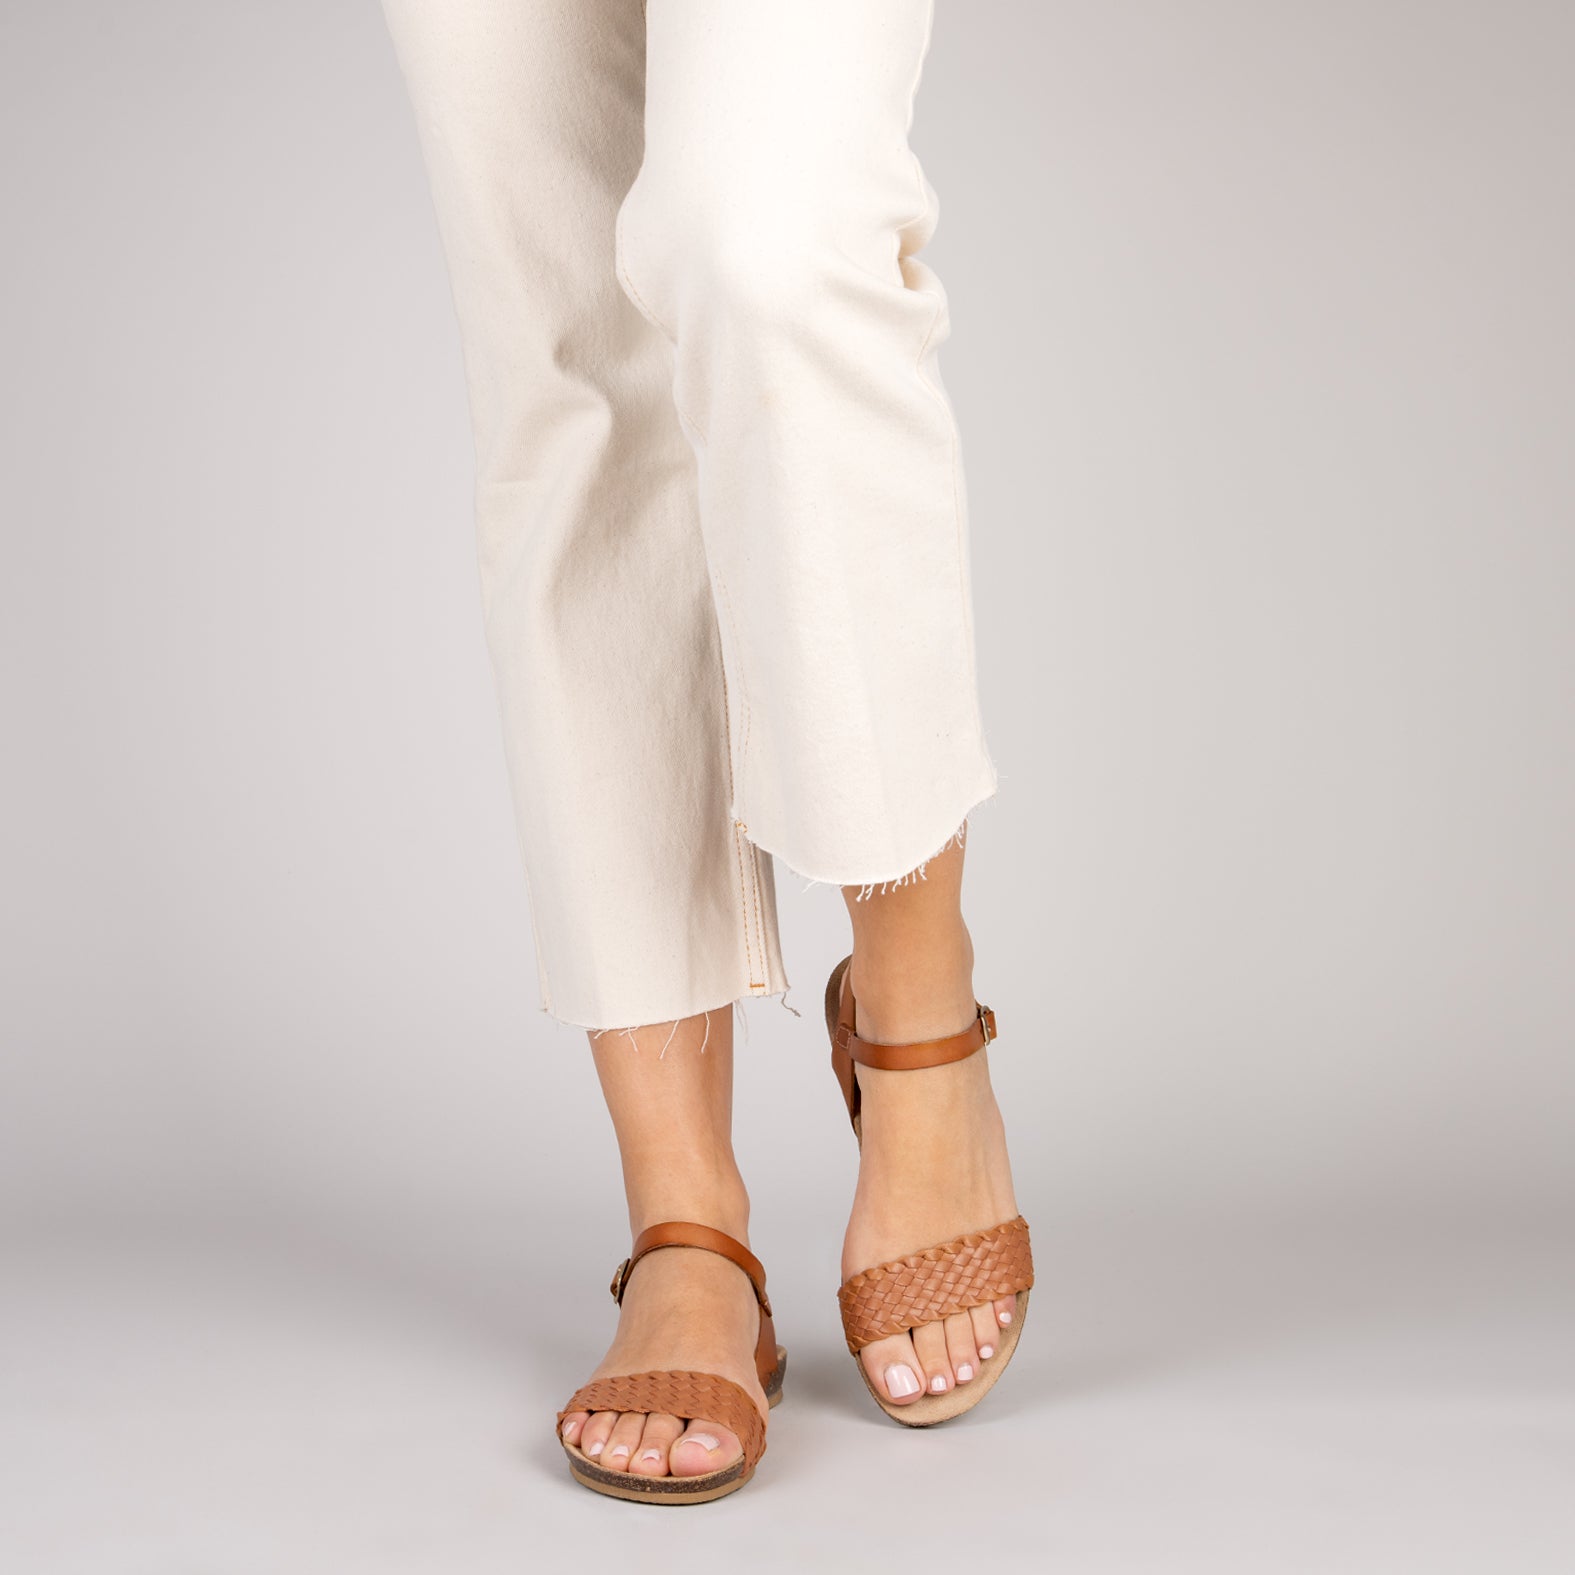 AIRE - LEATHER BIO Flat Sandals with braided strap